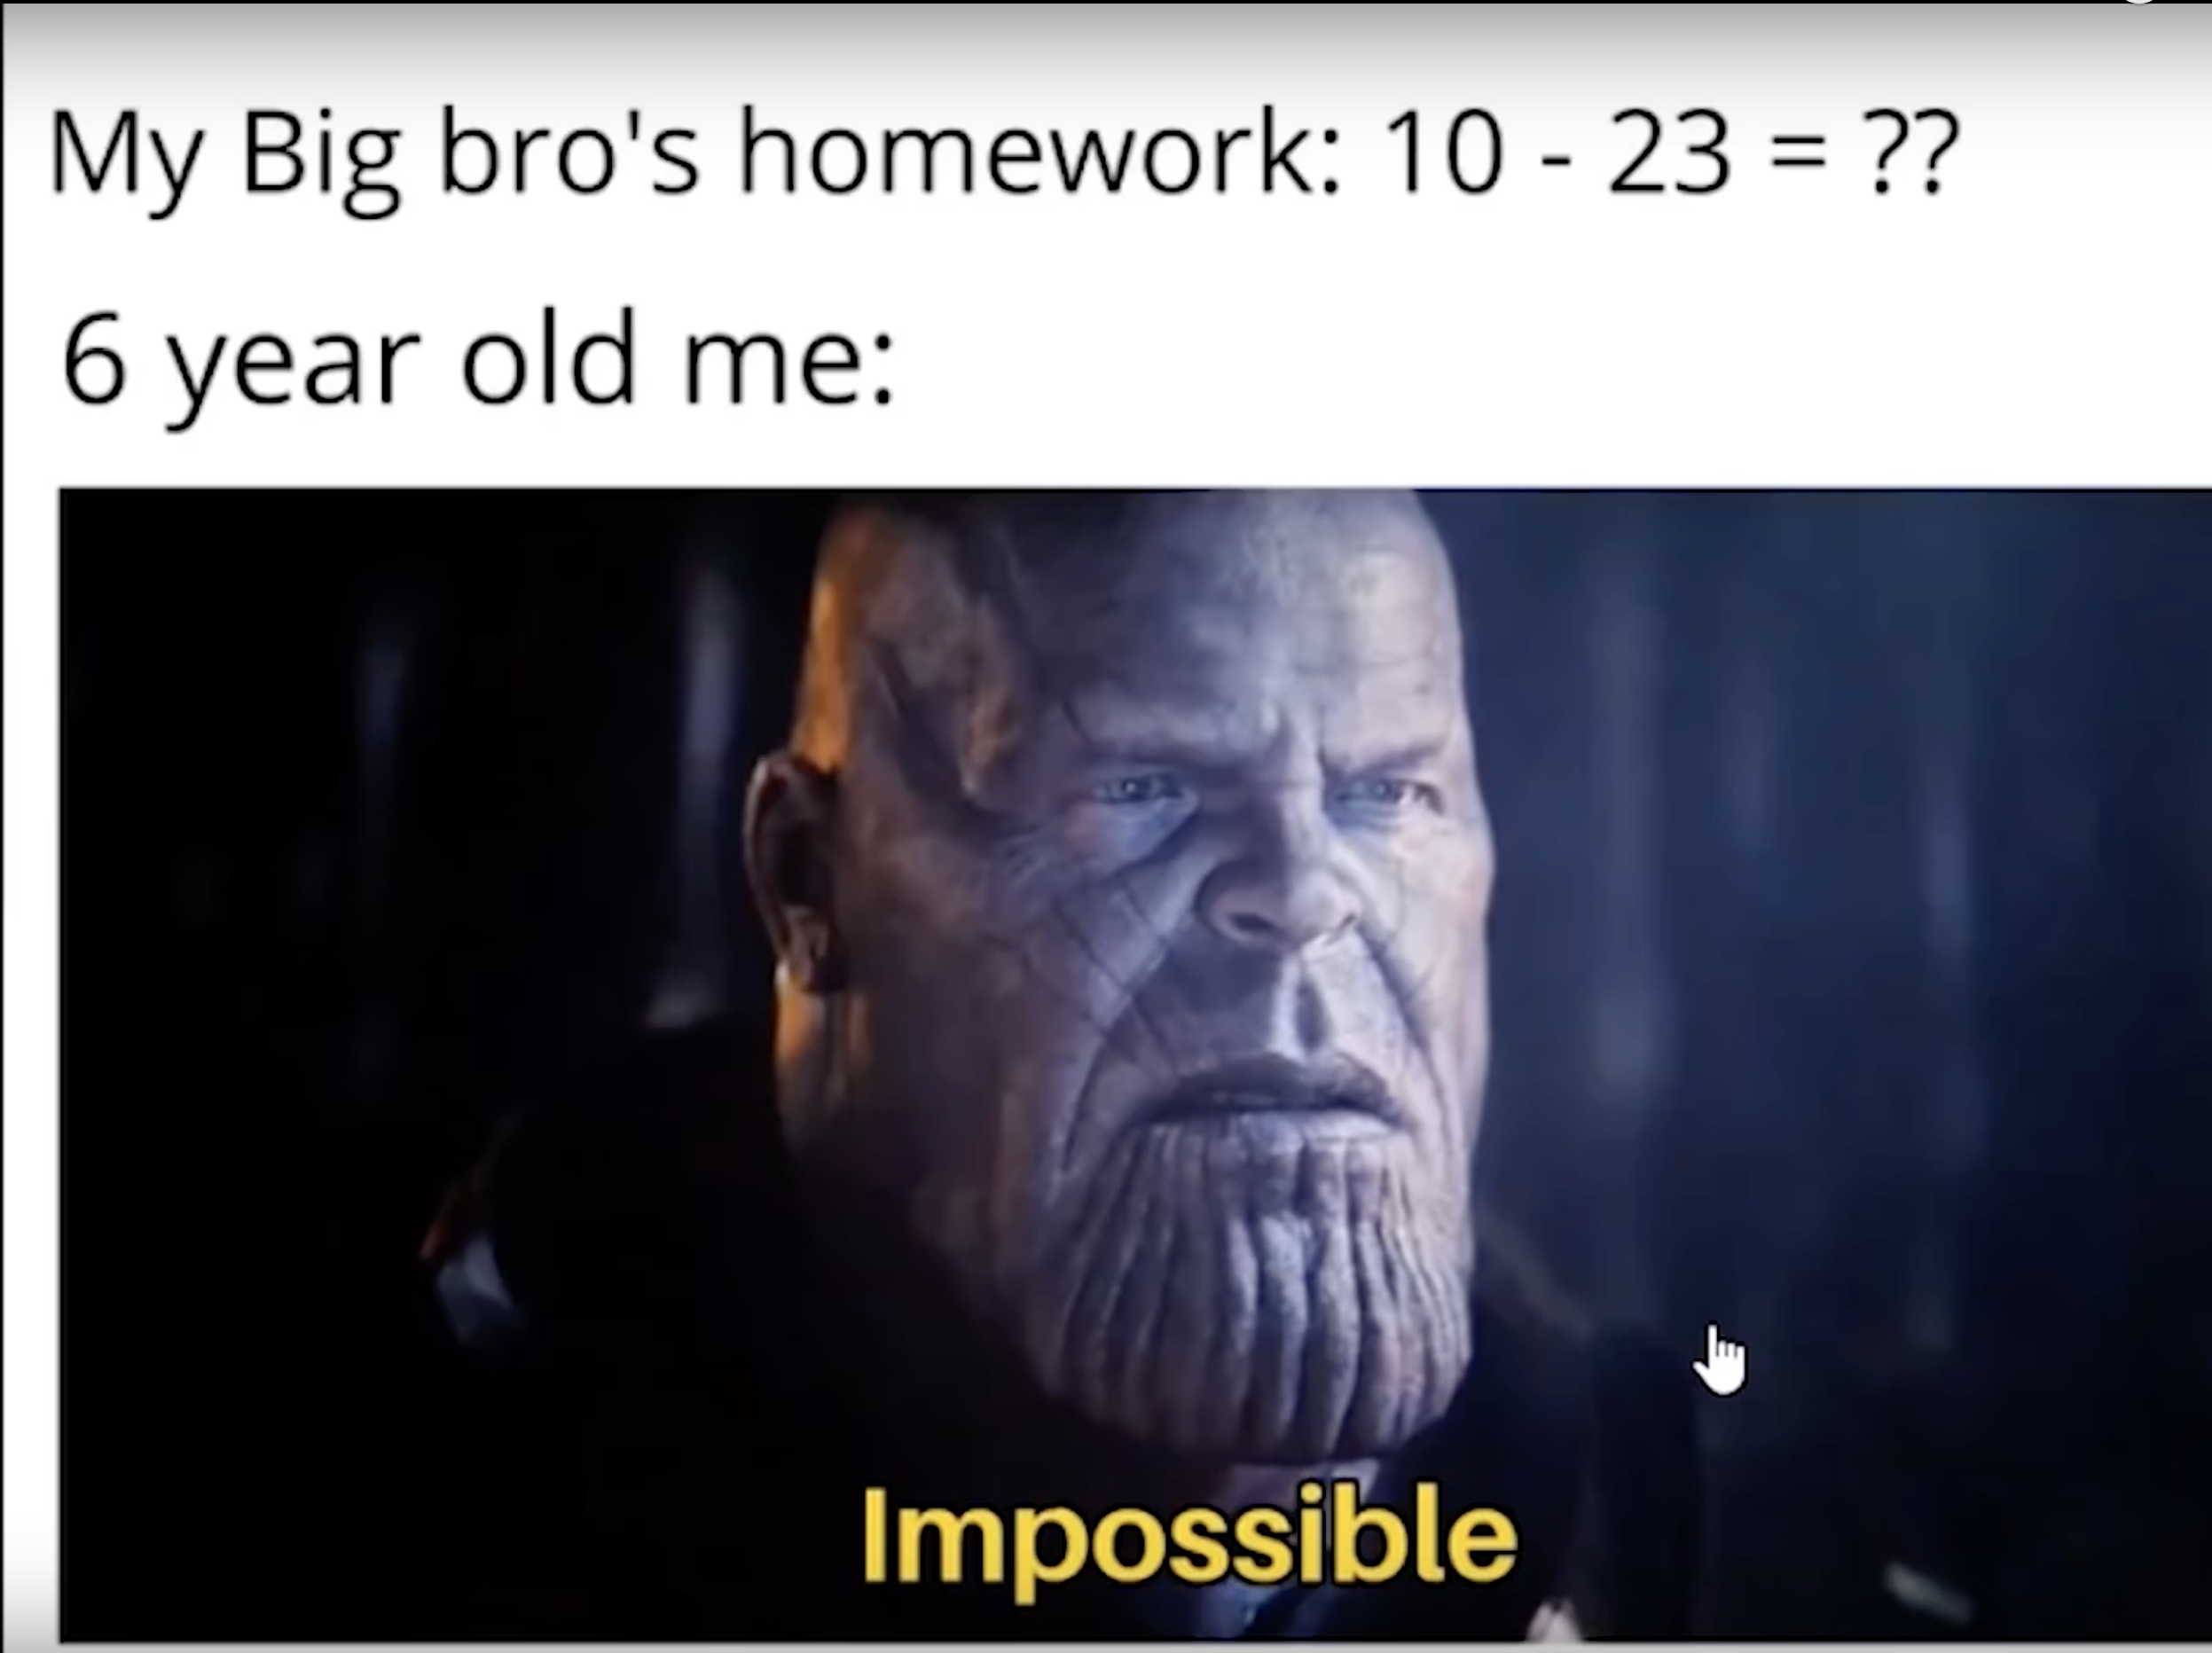 thanos impossible meme - My Big bro's homework 10 23 ?? 6 year old me Impossible